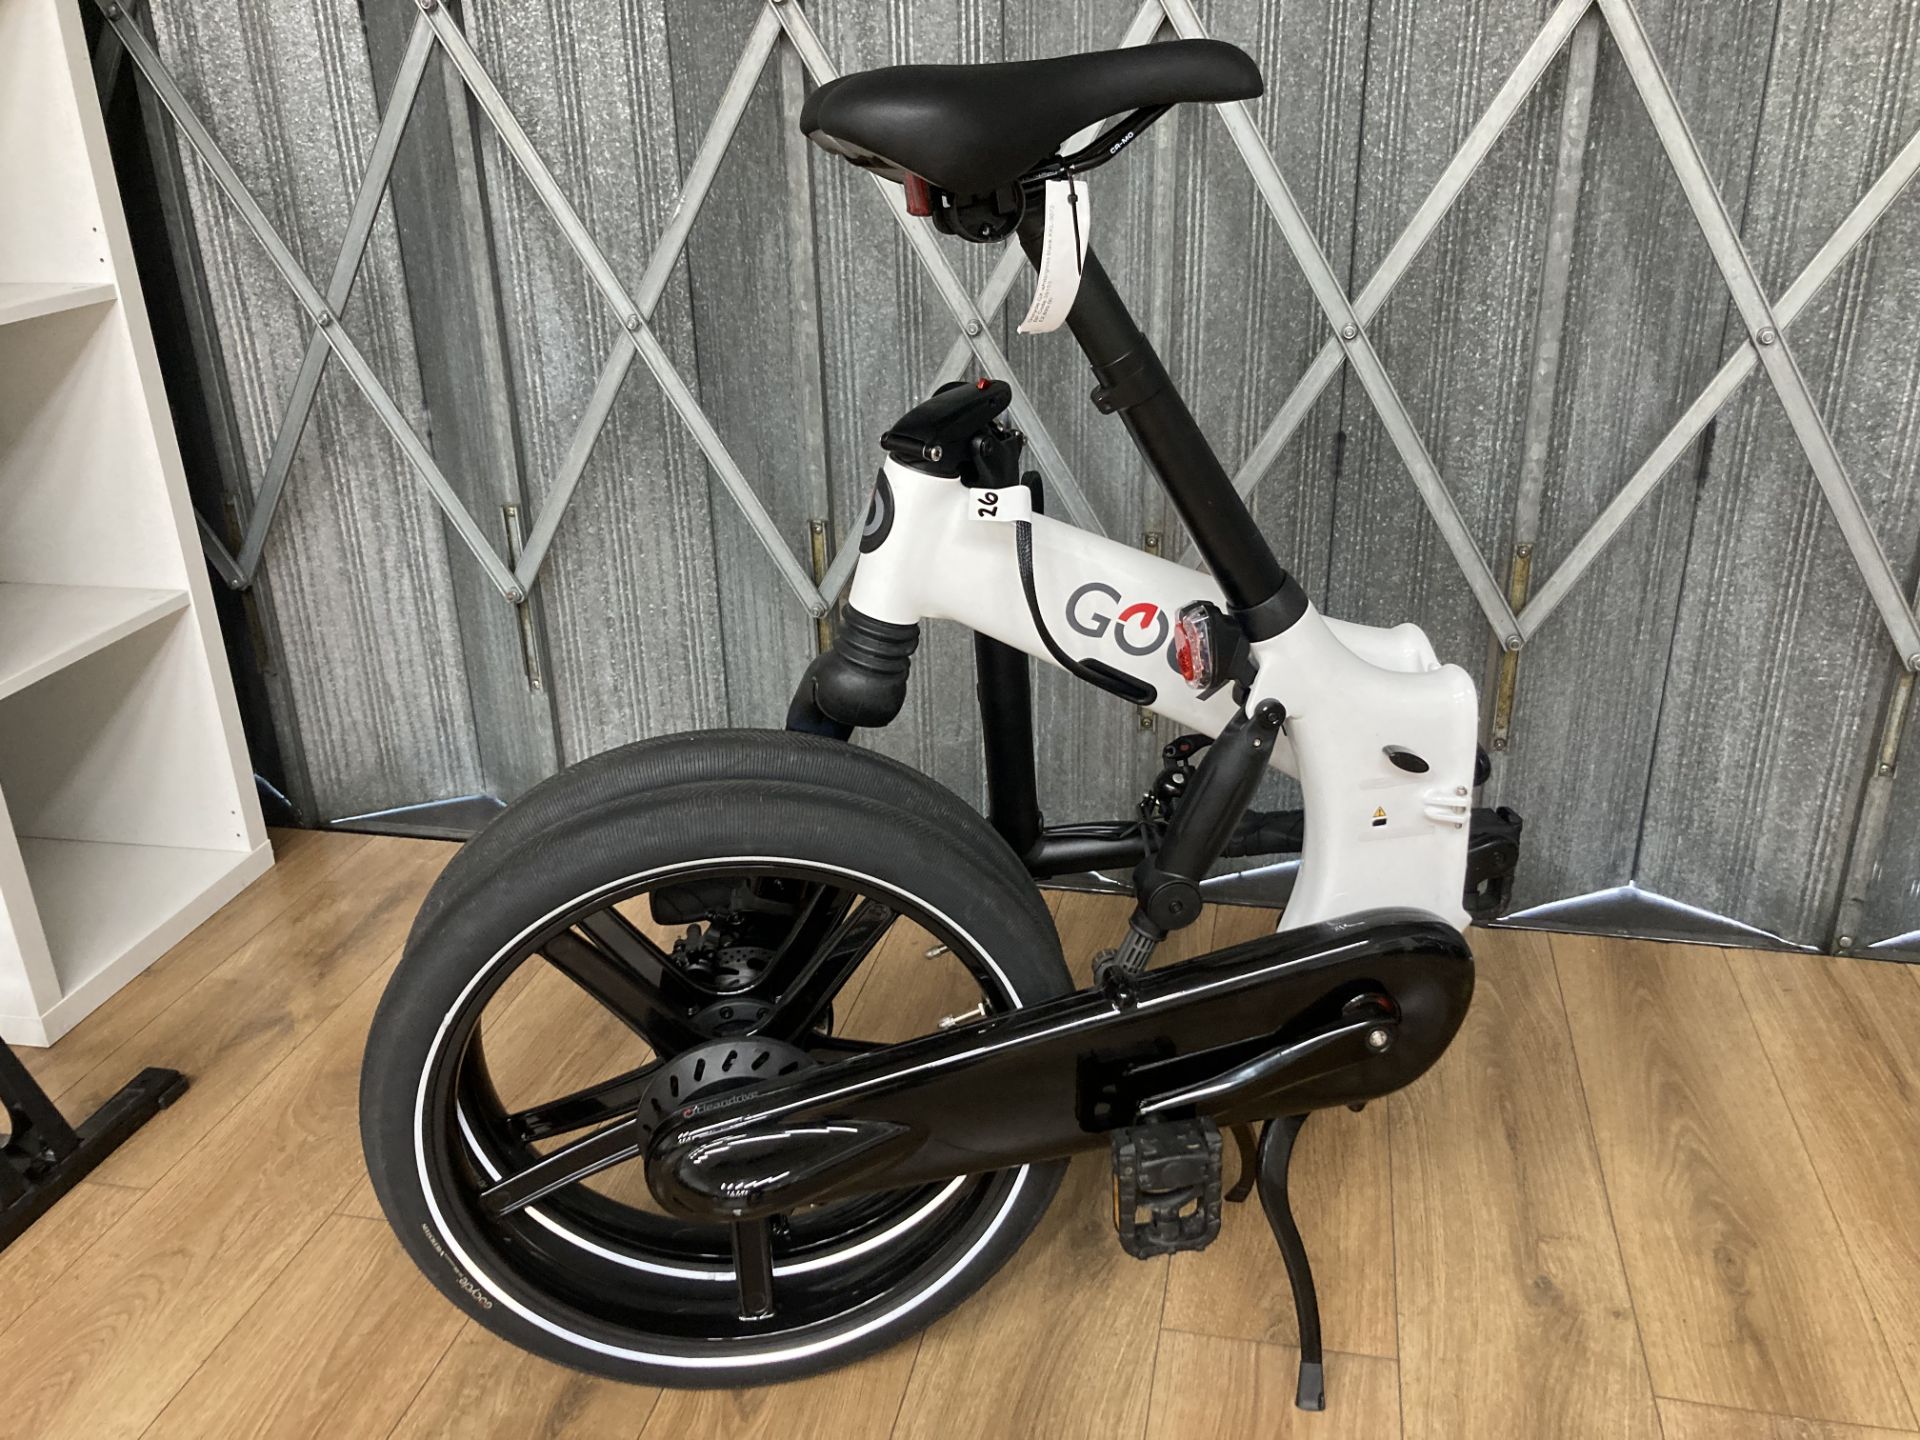 Gocycle GX White/gloss black No battery pack - Image 3 of 3